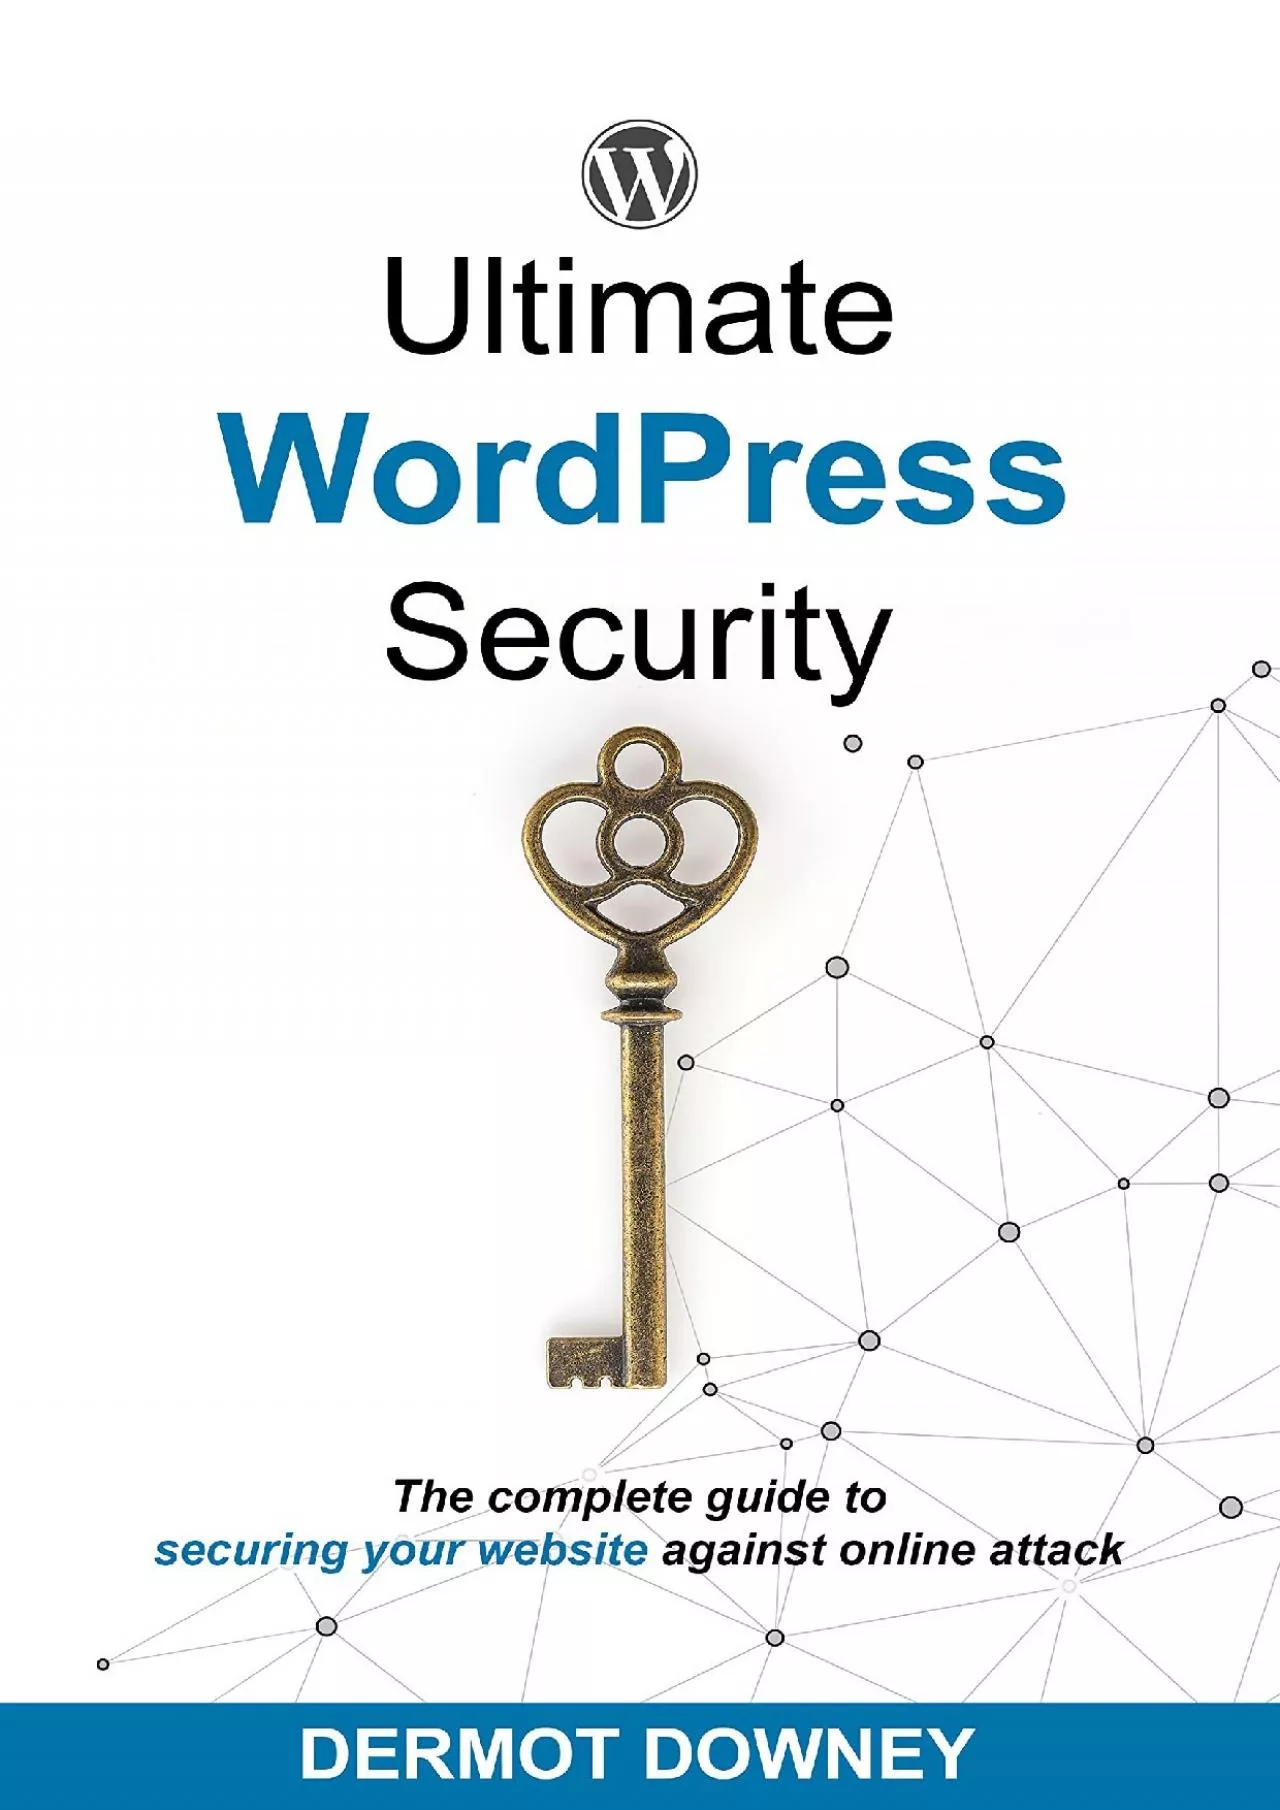 (EBOOK)-Ultimate WordPress Security: The complete guide to securing your website against